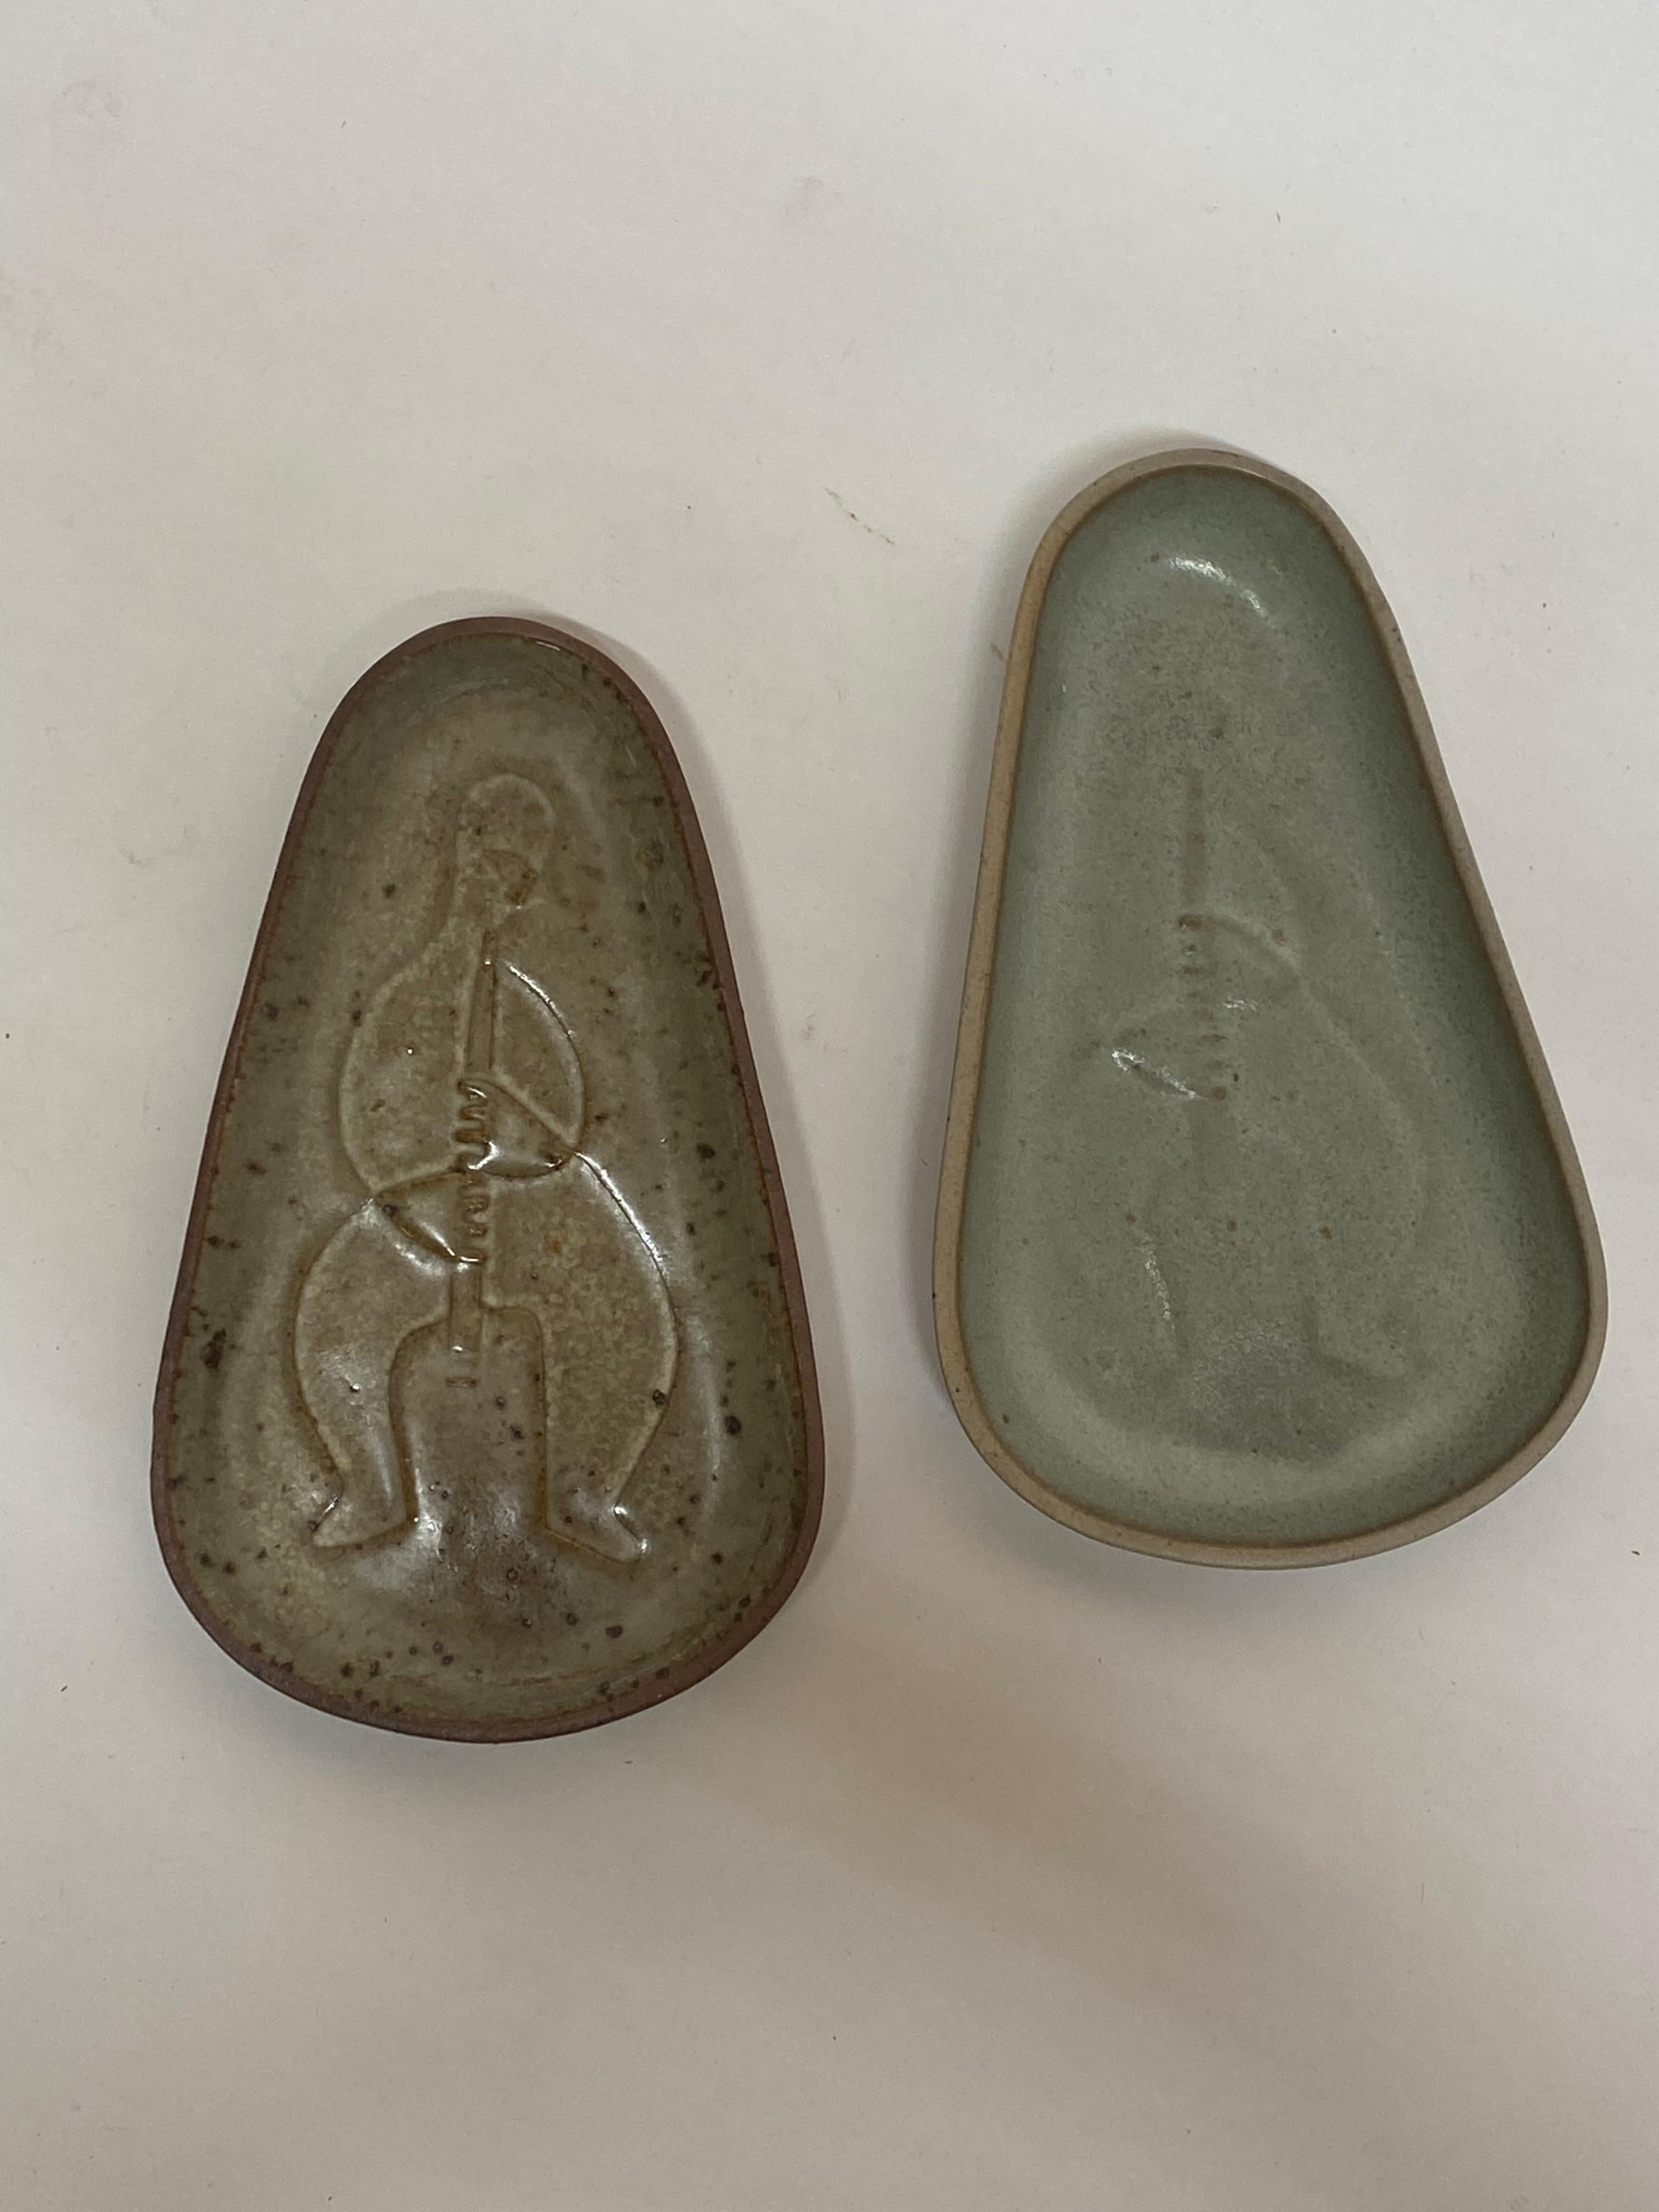 A pair of fine and early Bennington Potters triangular trinket trays. Signed on the reverse with early COOP and hand and face cipher mark. This mark apparently pre-dates the spark/forearm and hand stamp. The line image of the clarinet player (?) is